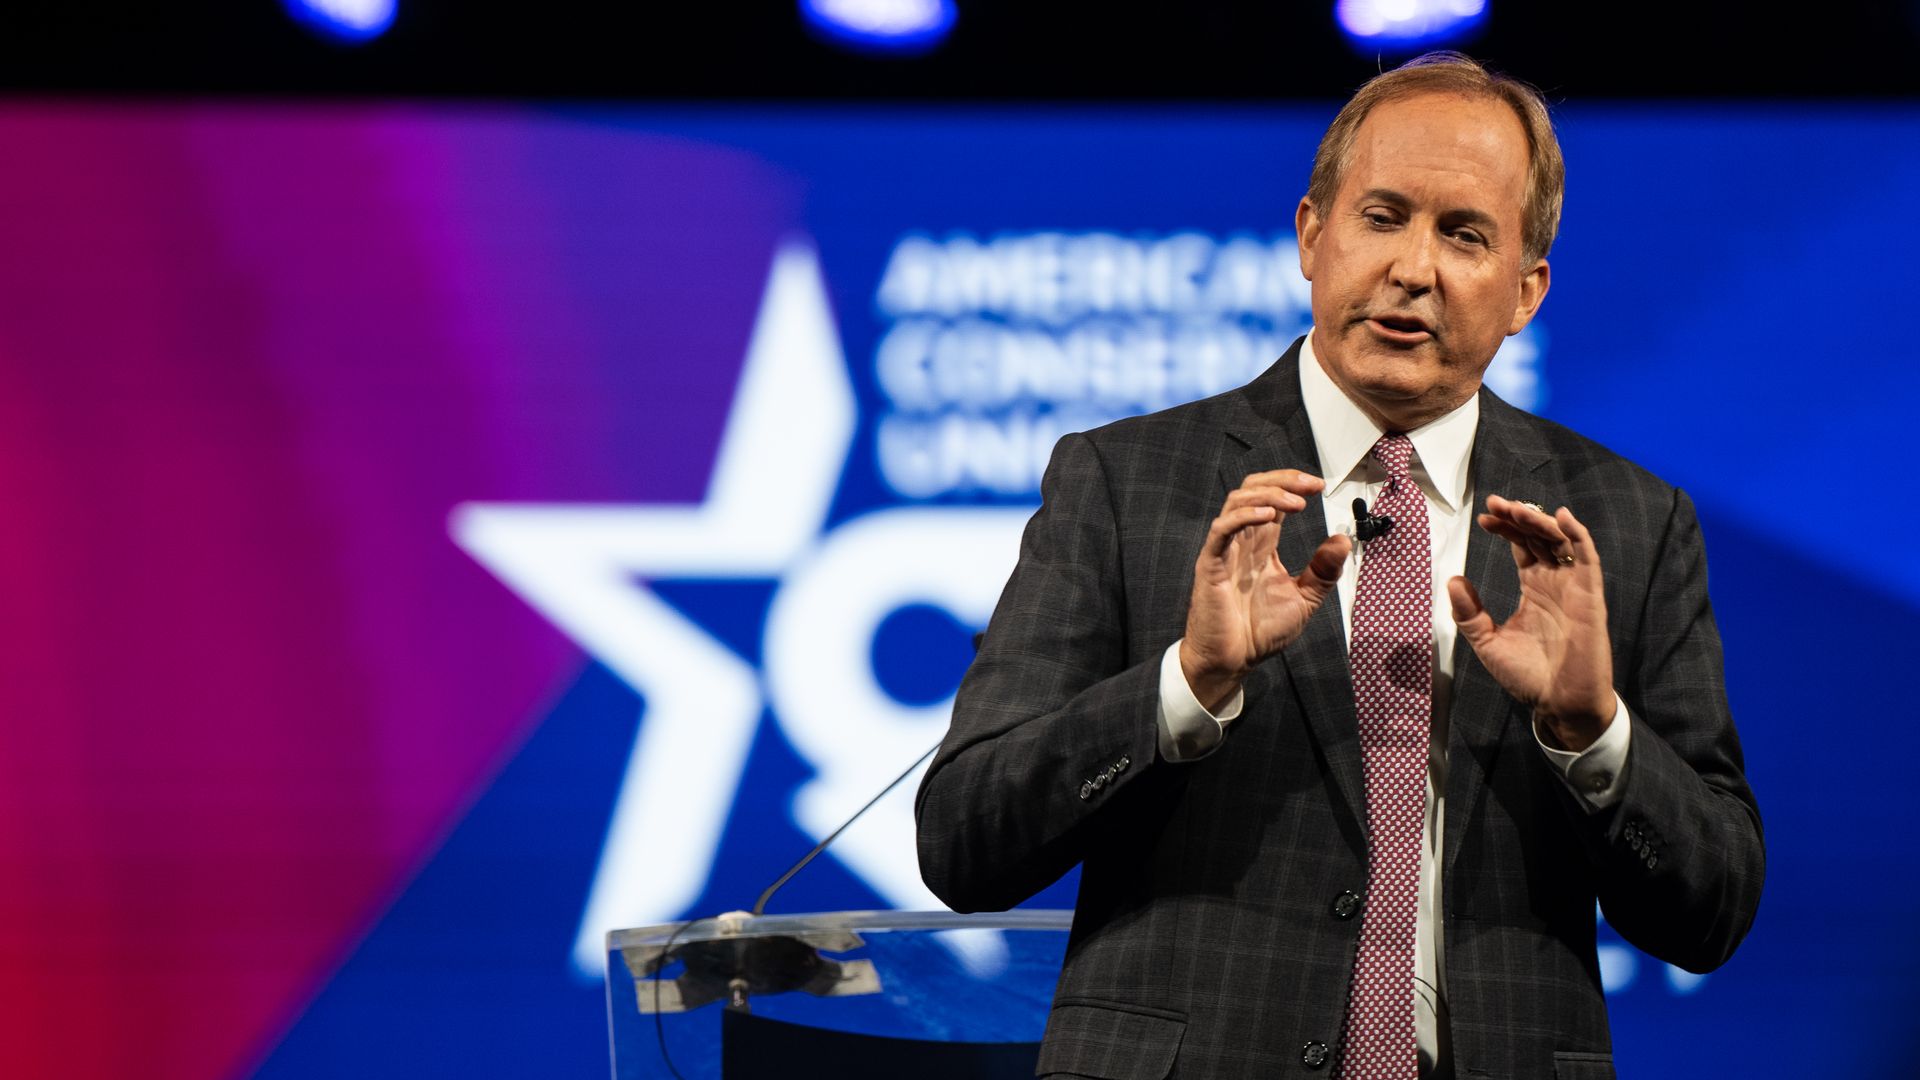  Texas Attorney General Ken Paxton speaks during the Conservative Political Action Conference CPAC held at the Hilton Anatole on July 11, 2021 in Dallas, Texas.